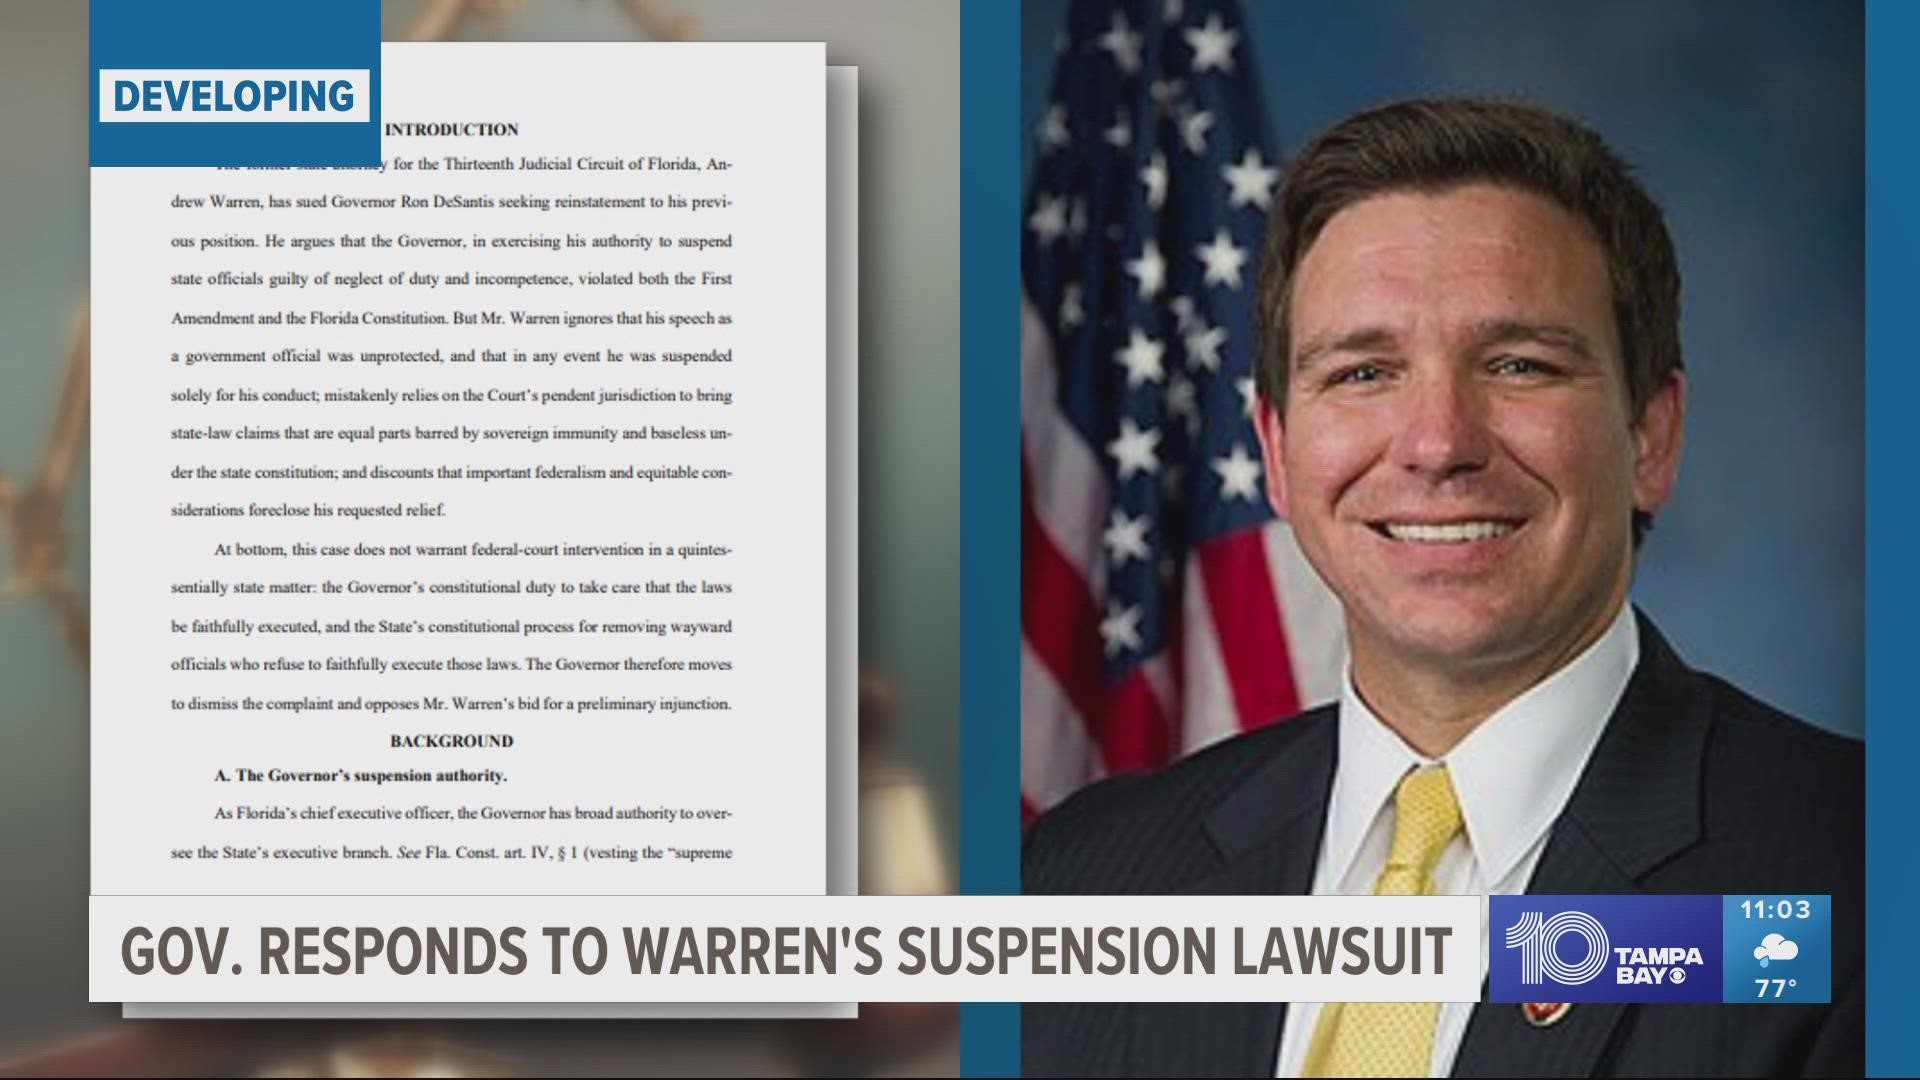 In a response, DeSantis argues he has the right to take Andrew Warren out of the job based on the "broad authorities to oversee the State's executive branch."